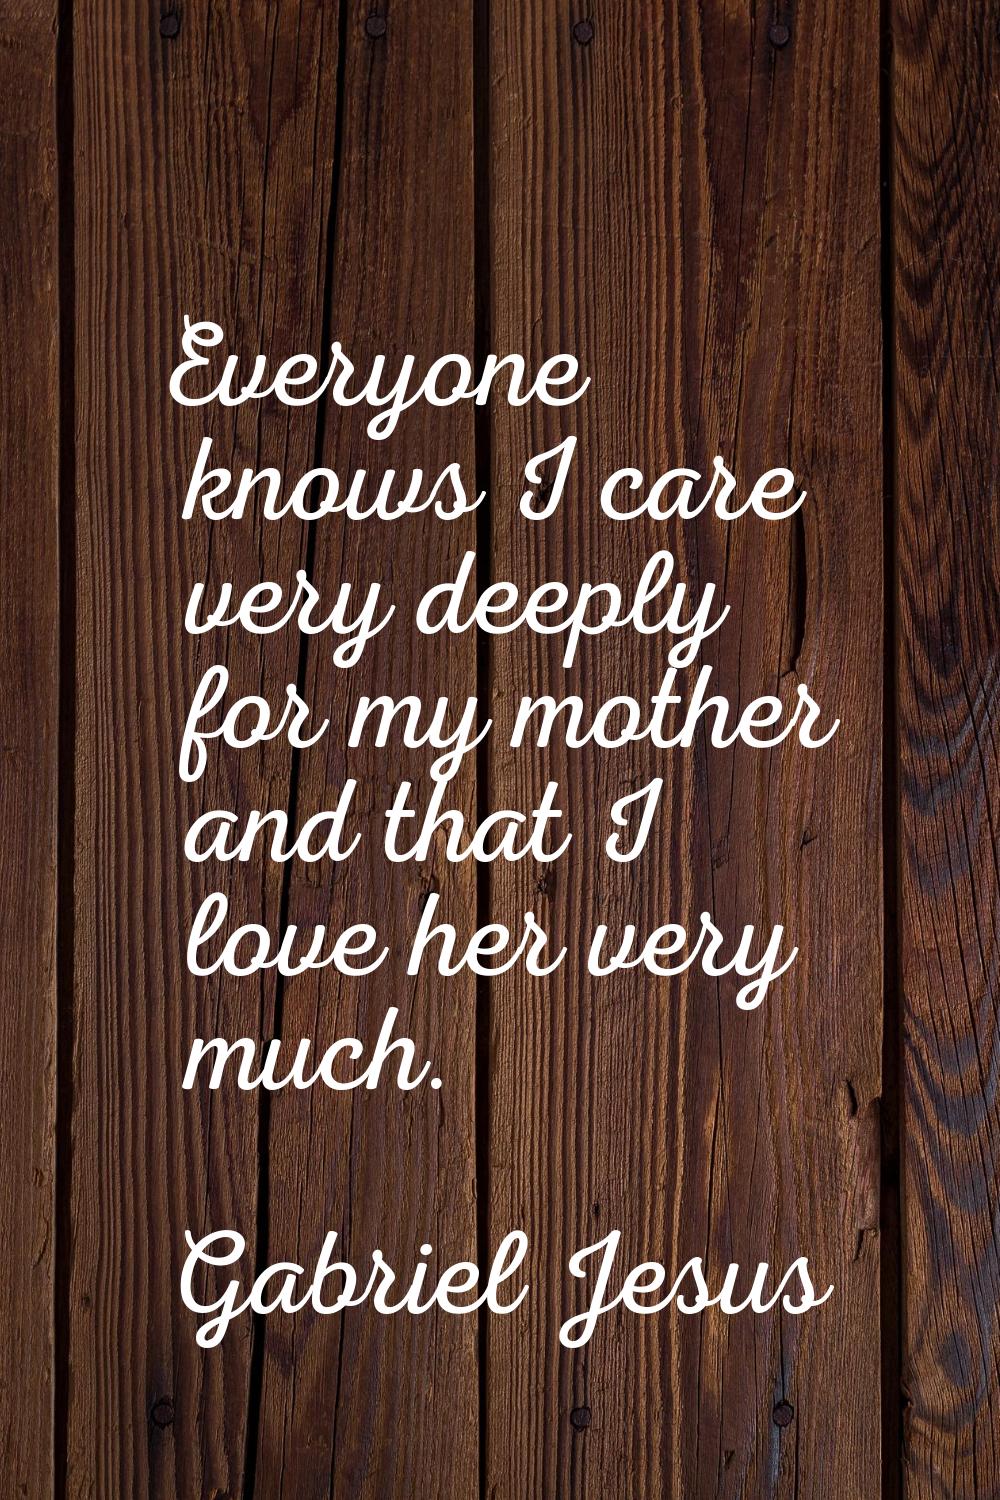 Everyone knows I care very deeply for my mother and that I love her very much.